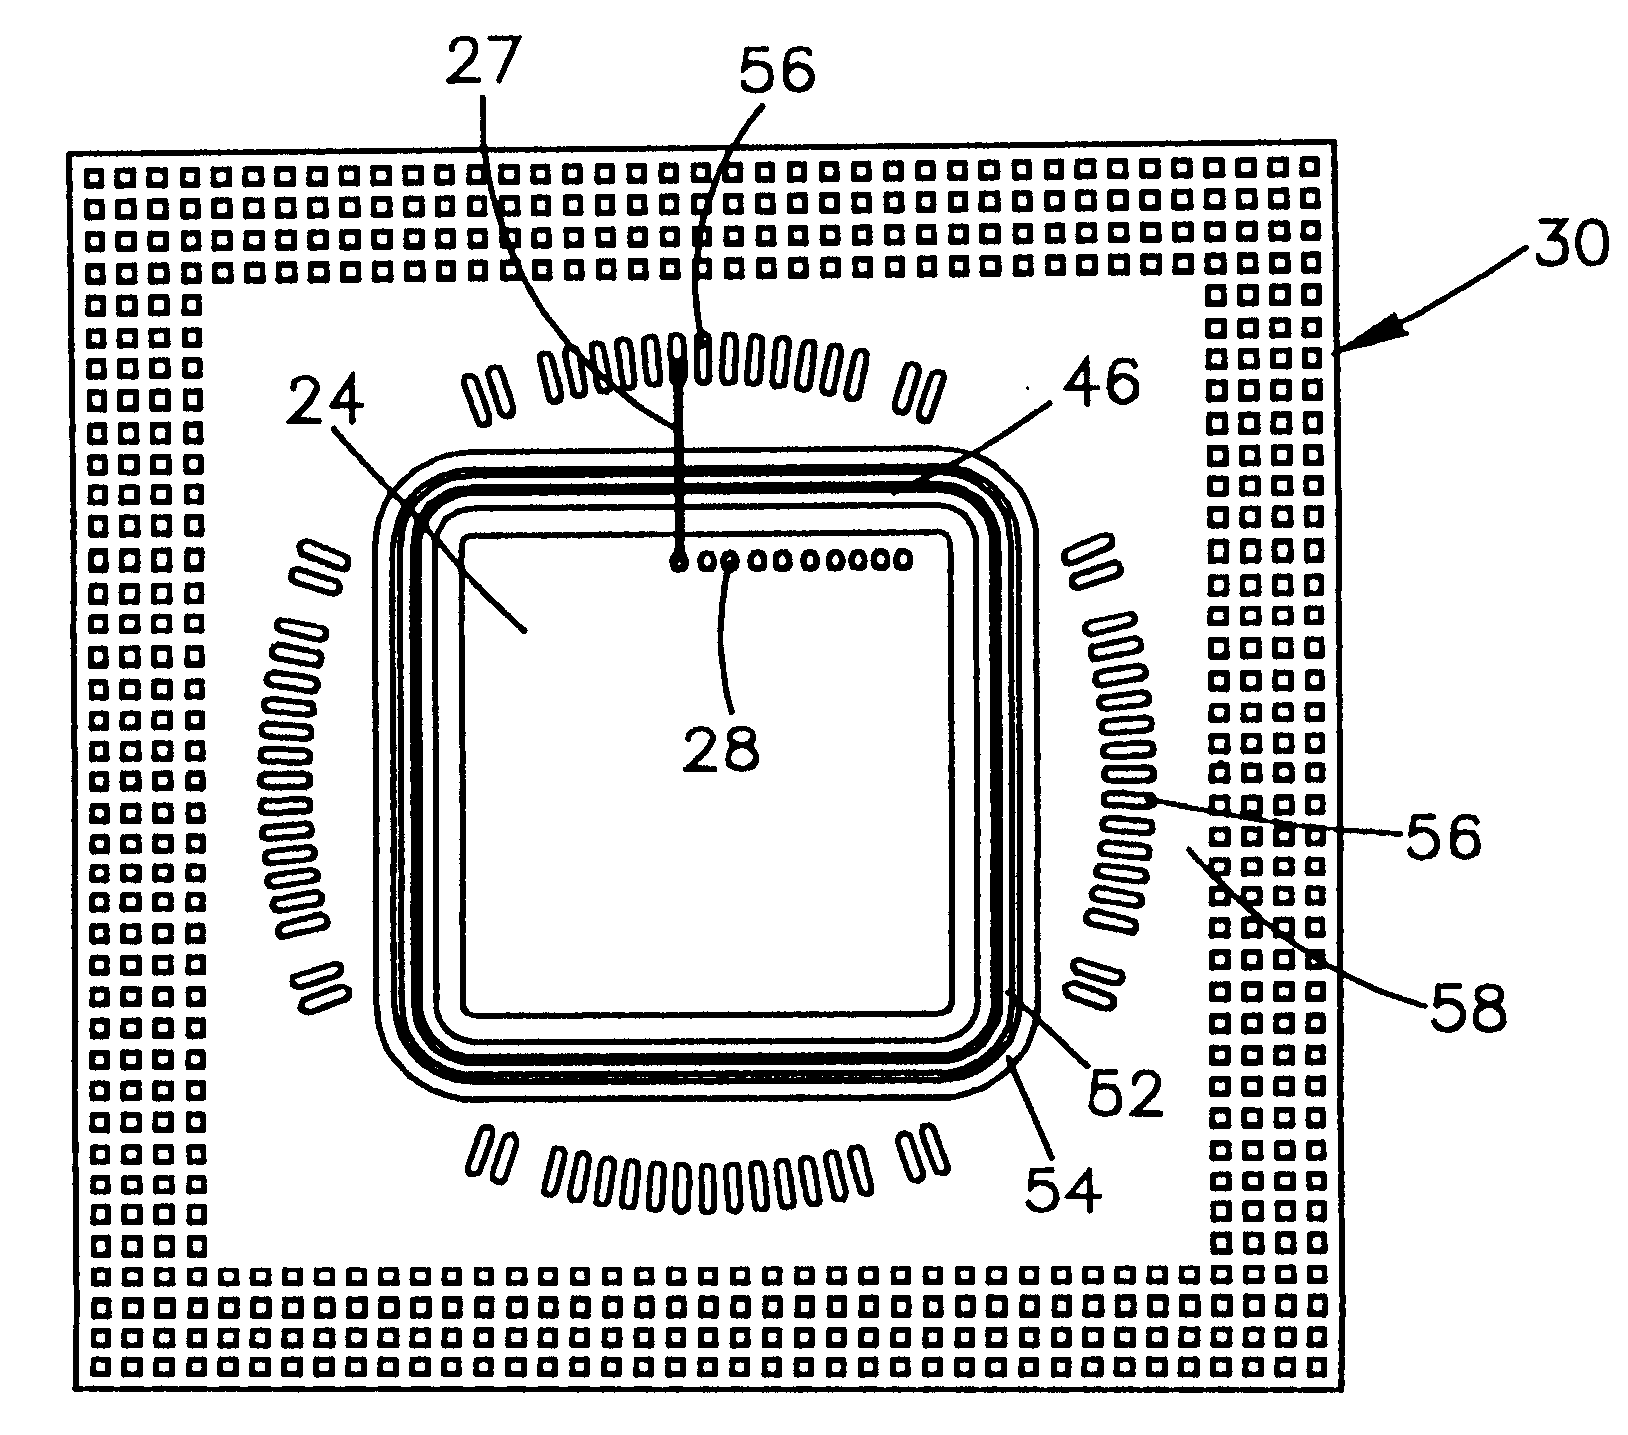 Structure for preventing adhesive bleed onto surfaces